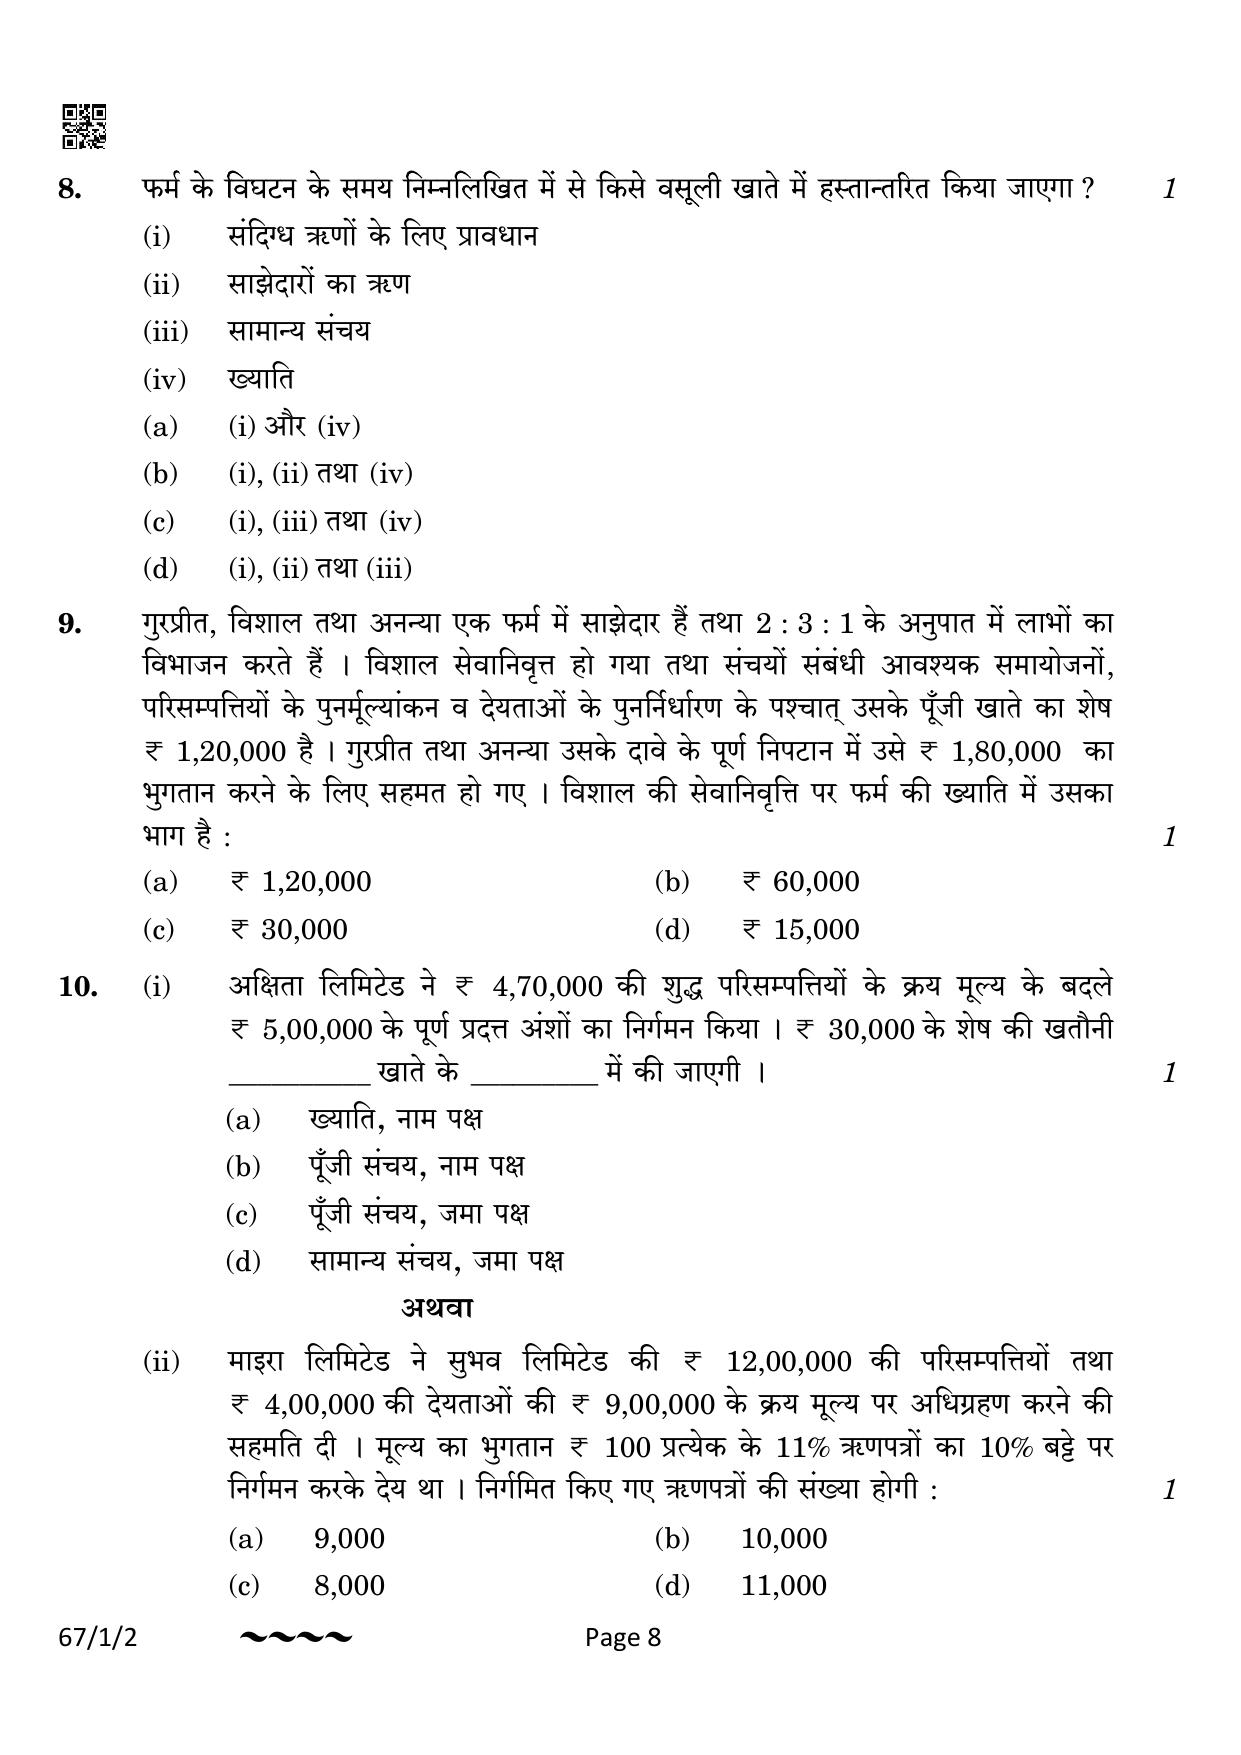 CBSE Class 12 67-1-2 Accountancy 2023 Question Paper - Page 8